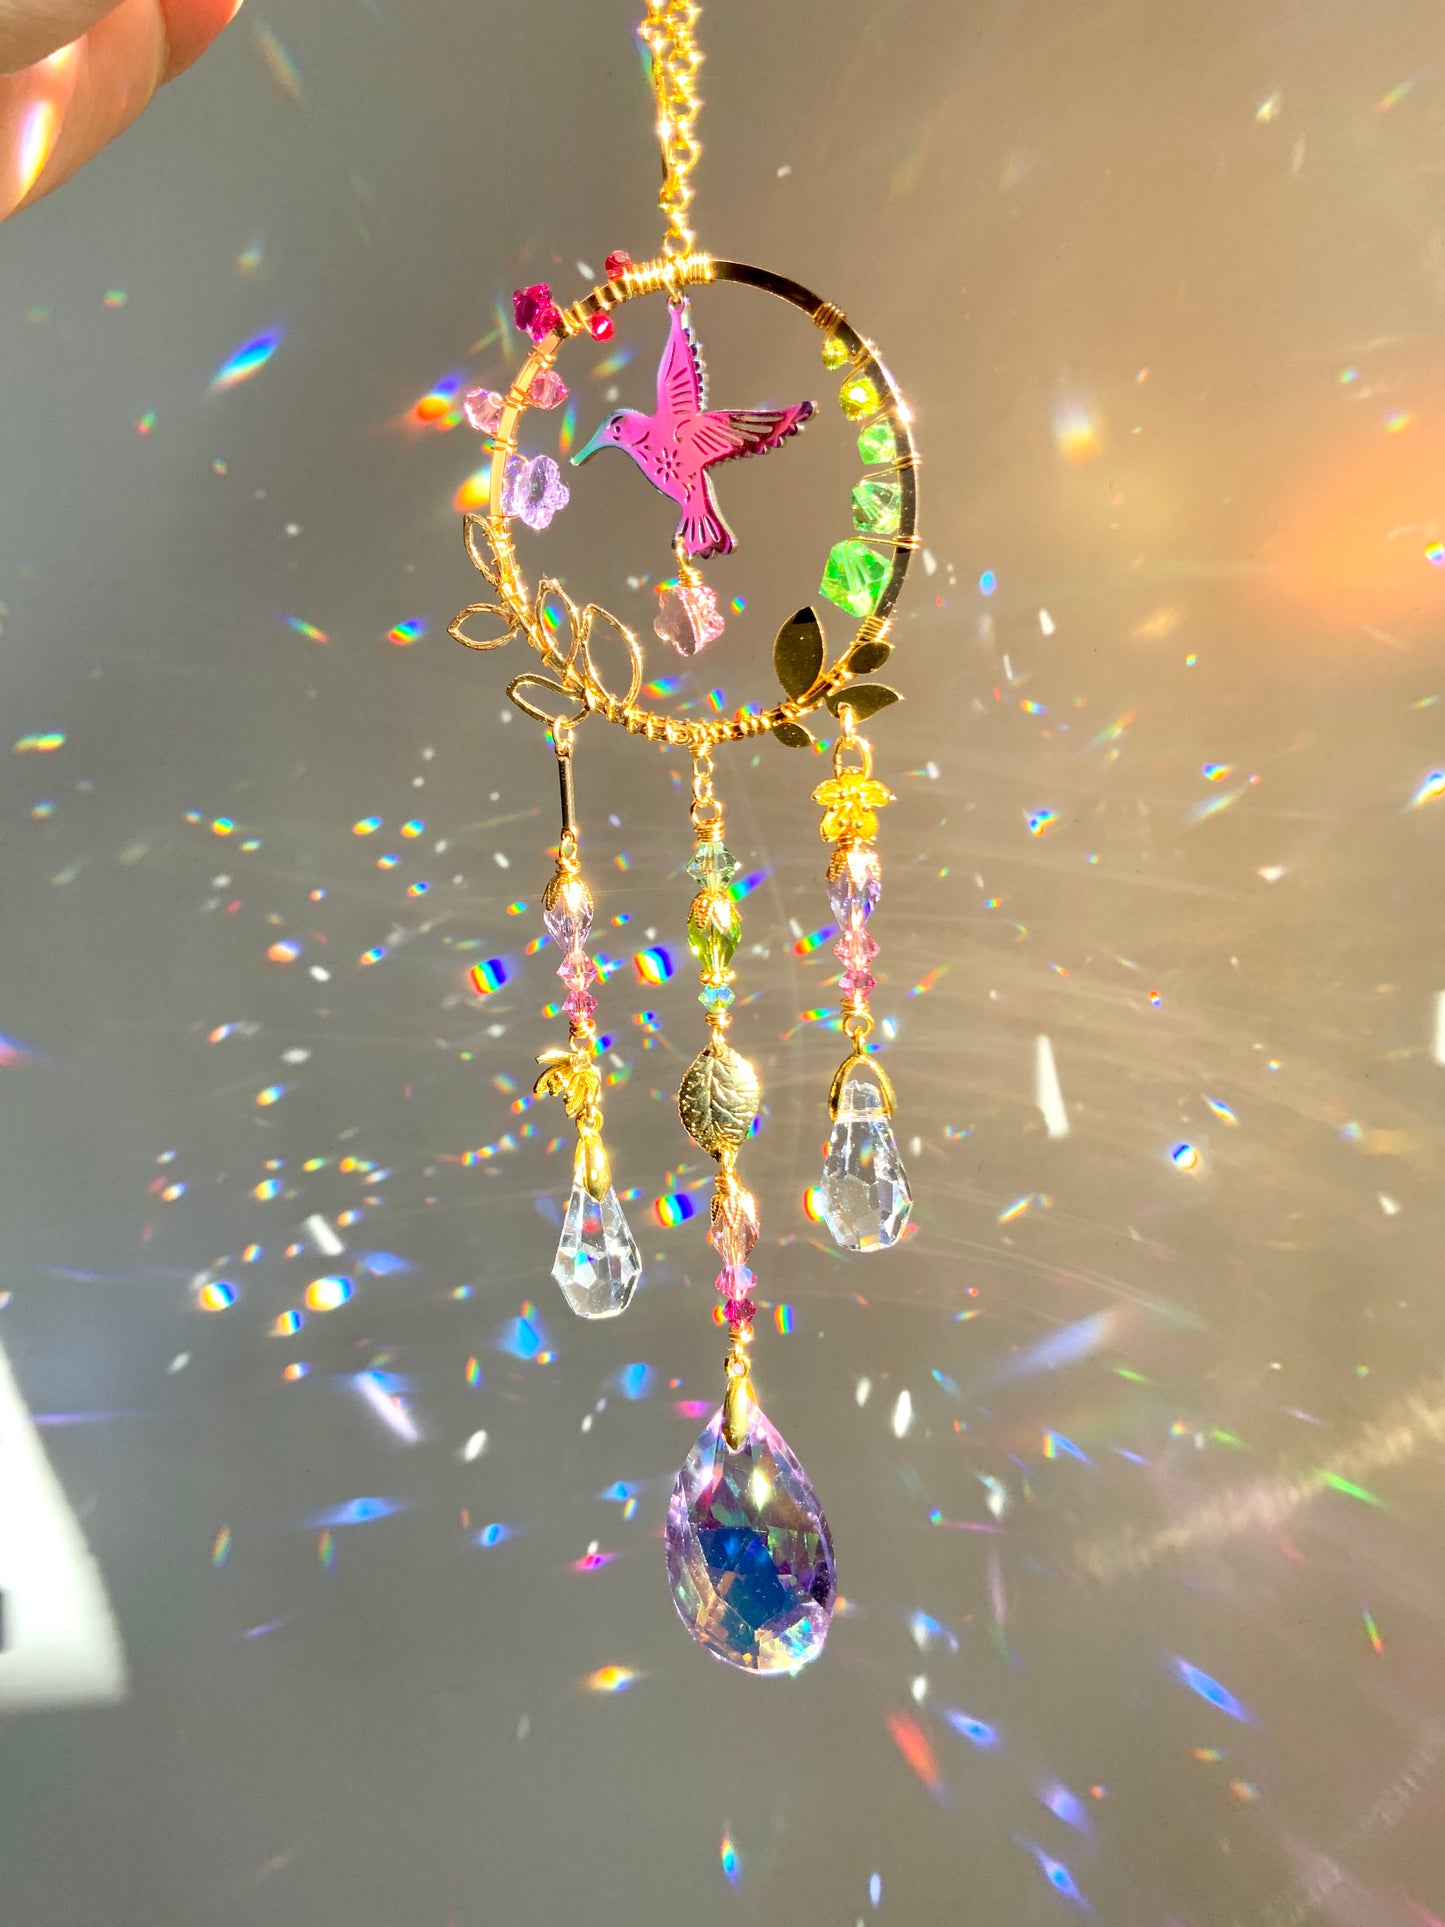 Hummingbird Car Charm ~ 18k Gold-plated, Stainless Steel, and ombré Crystal prisms for car mirror accessories